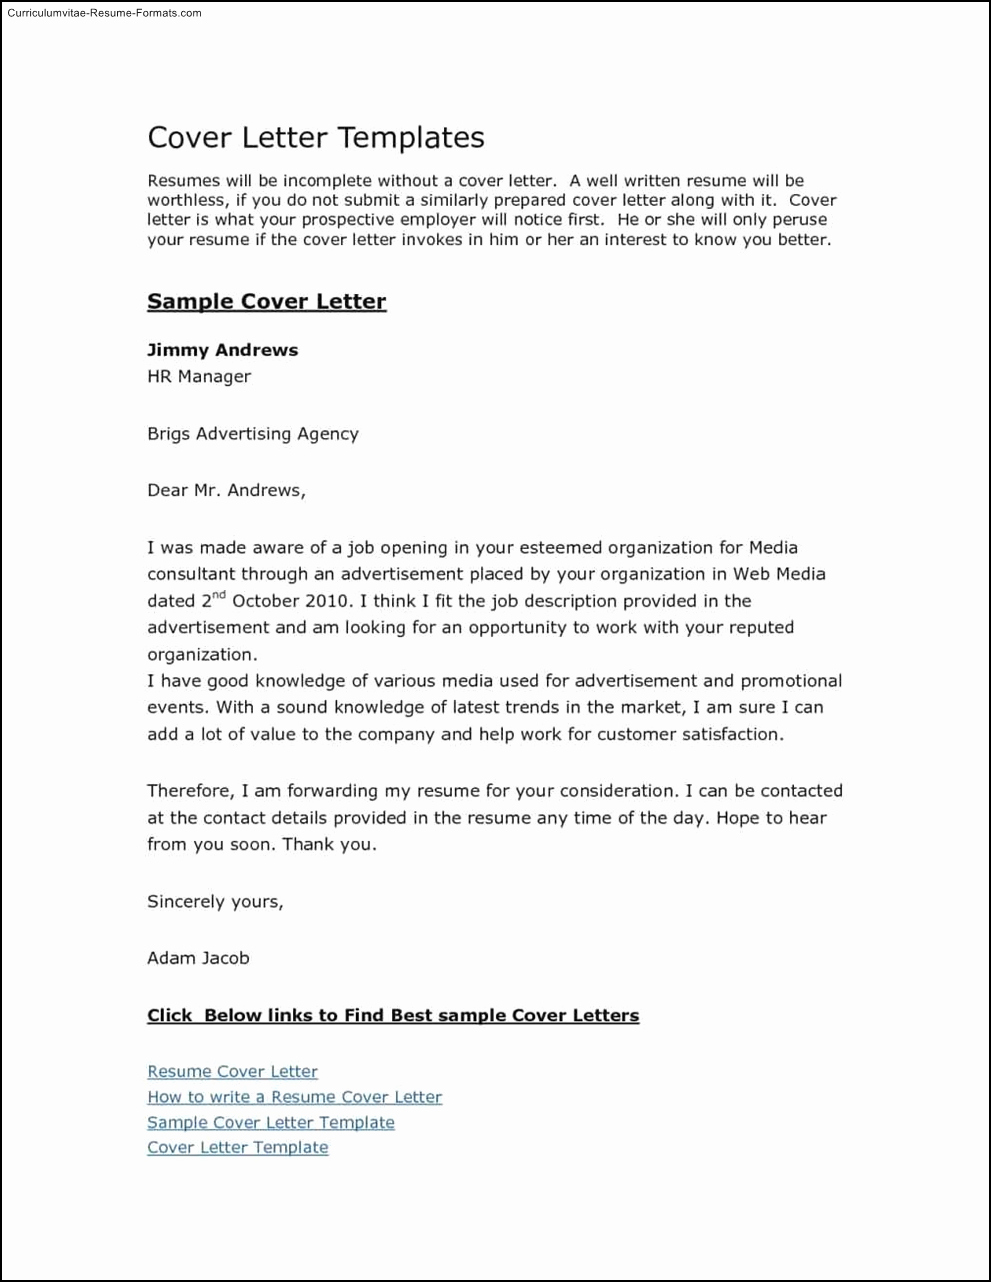 Resume Cover Letter Template Word Awesome Free Cover Letter Template for Resume In Word Free